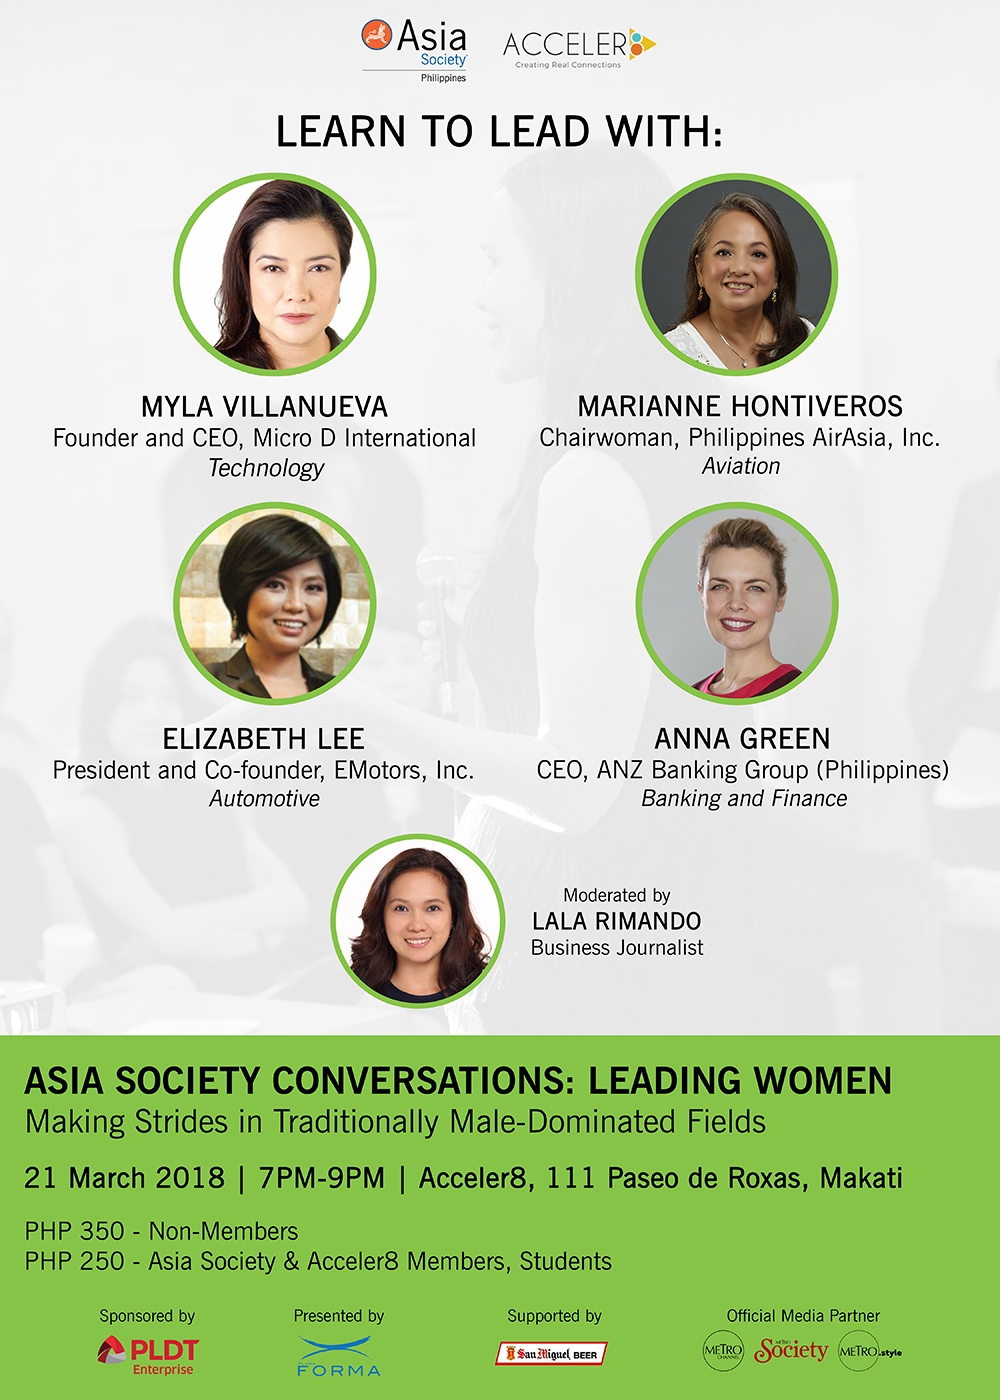 Asia Society Conversations: Leading Women | 21 March 2018 | Accceler8